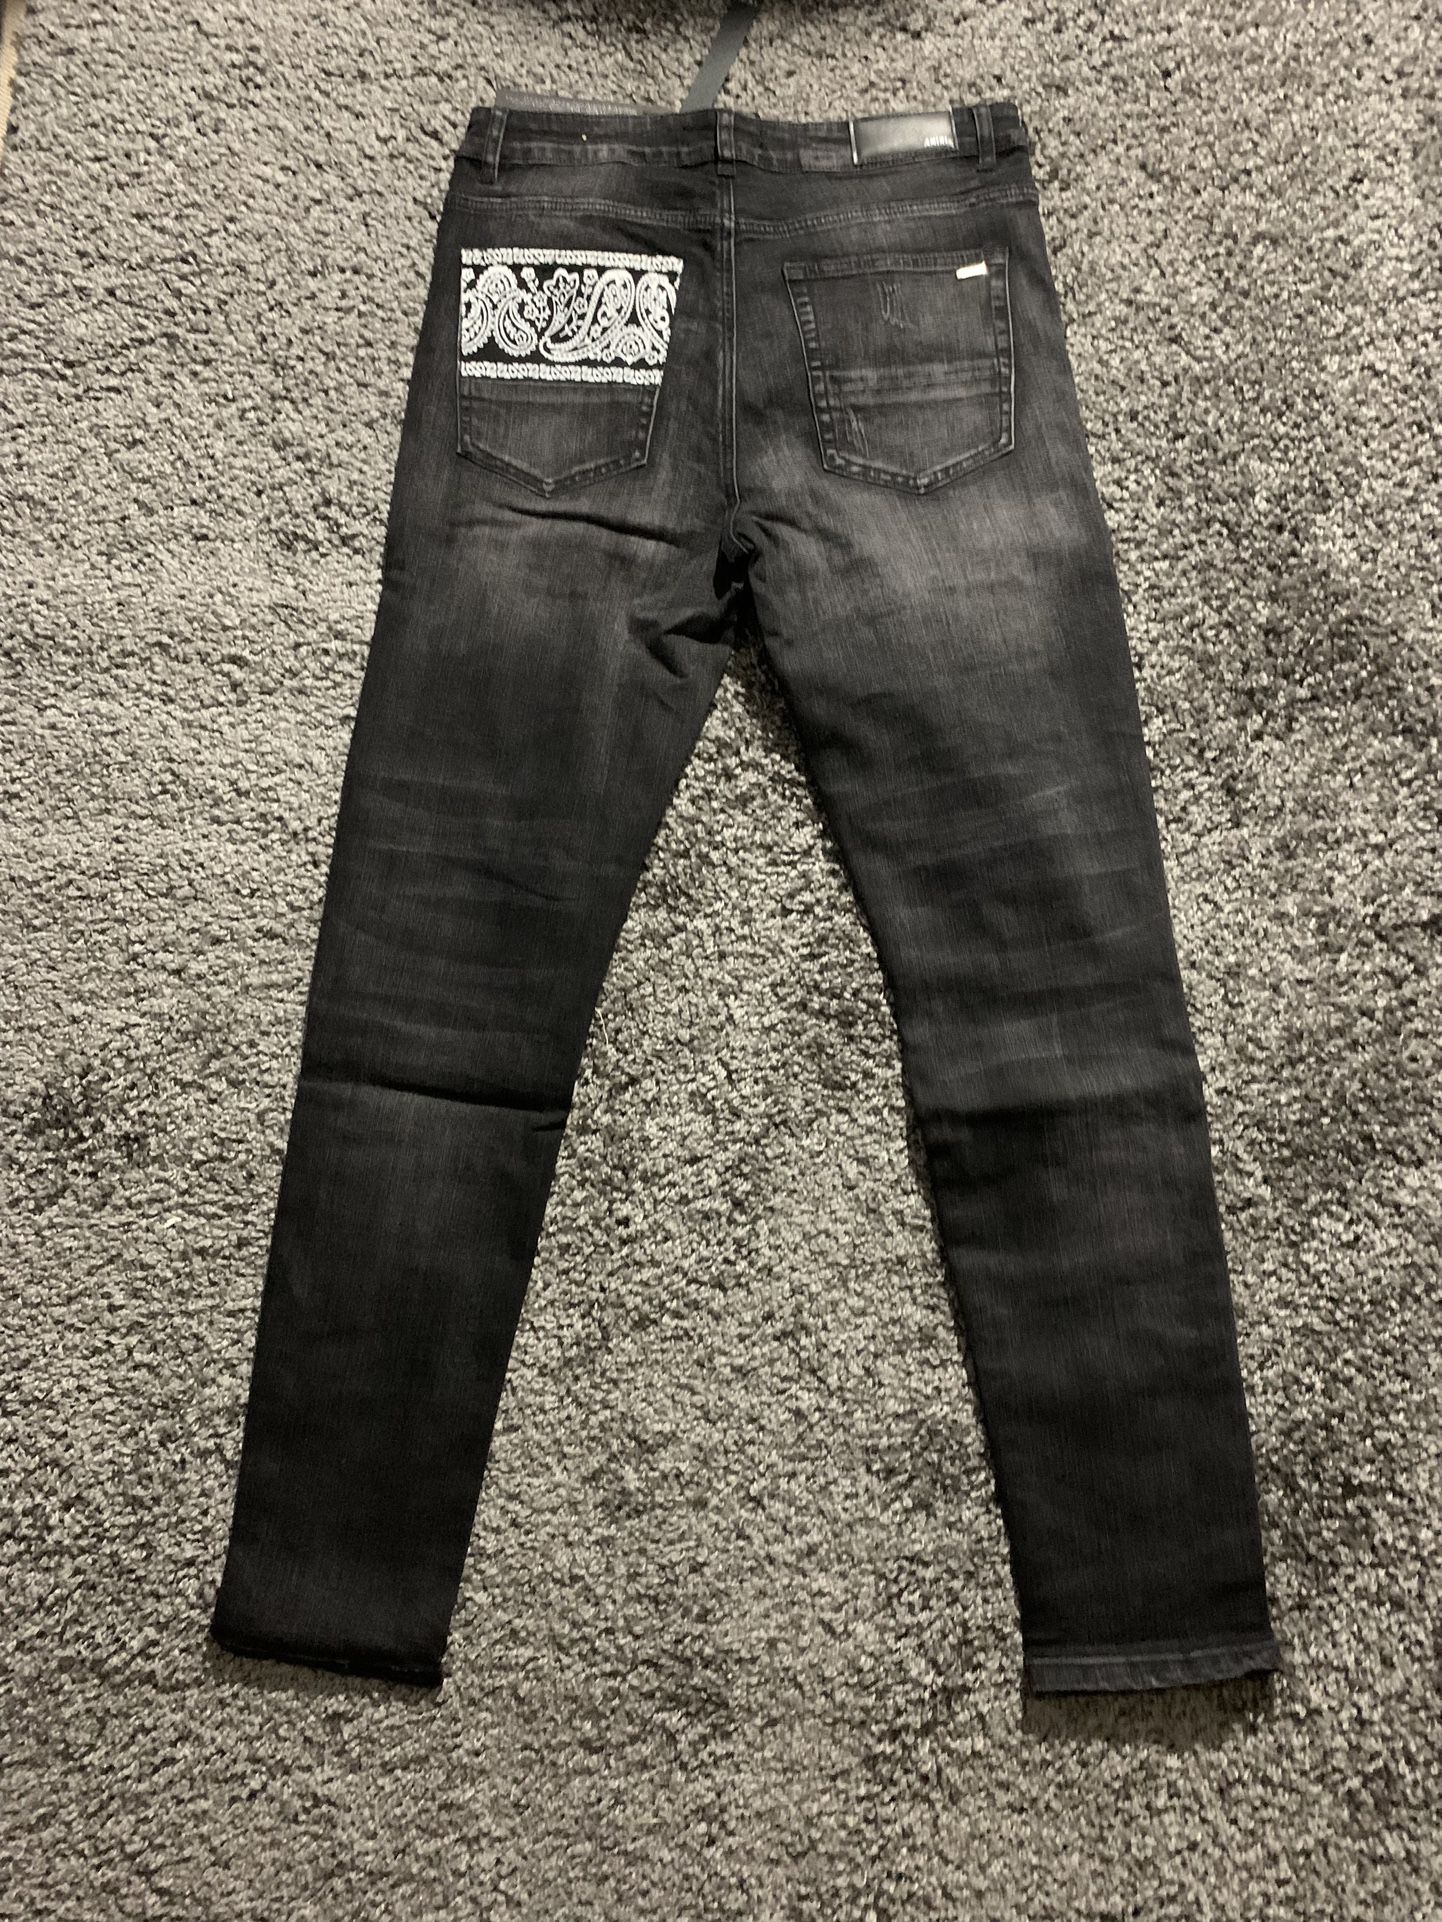 Amiri Jean 32 34 36s Available for Sale in Milwaukee, WI - OfferUp